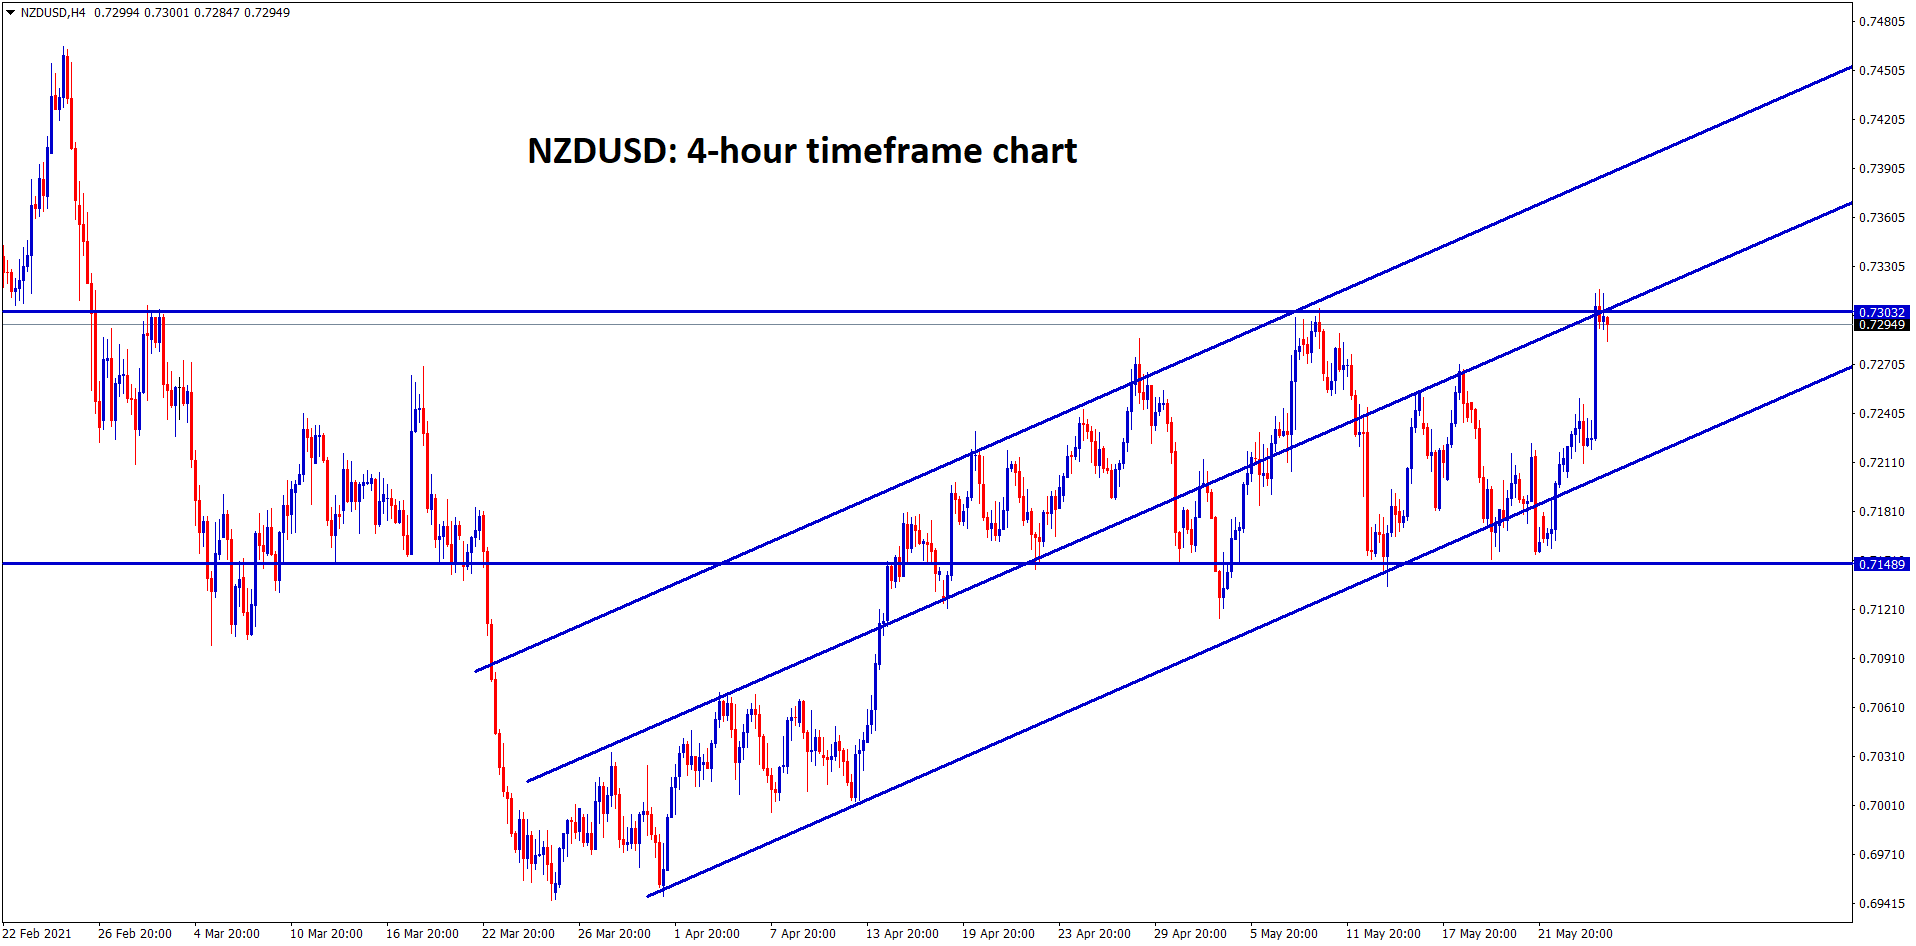 NZDUSD hits the major resistance level in 4 hour chart